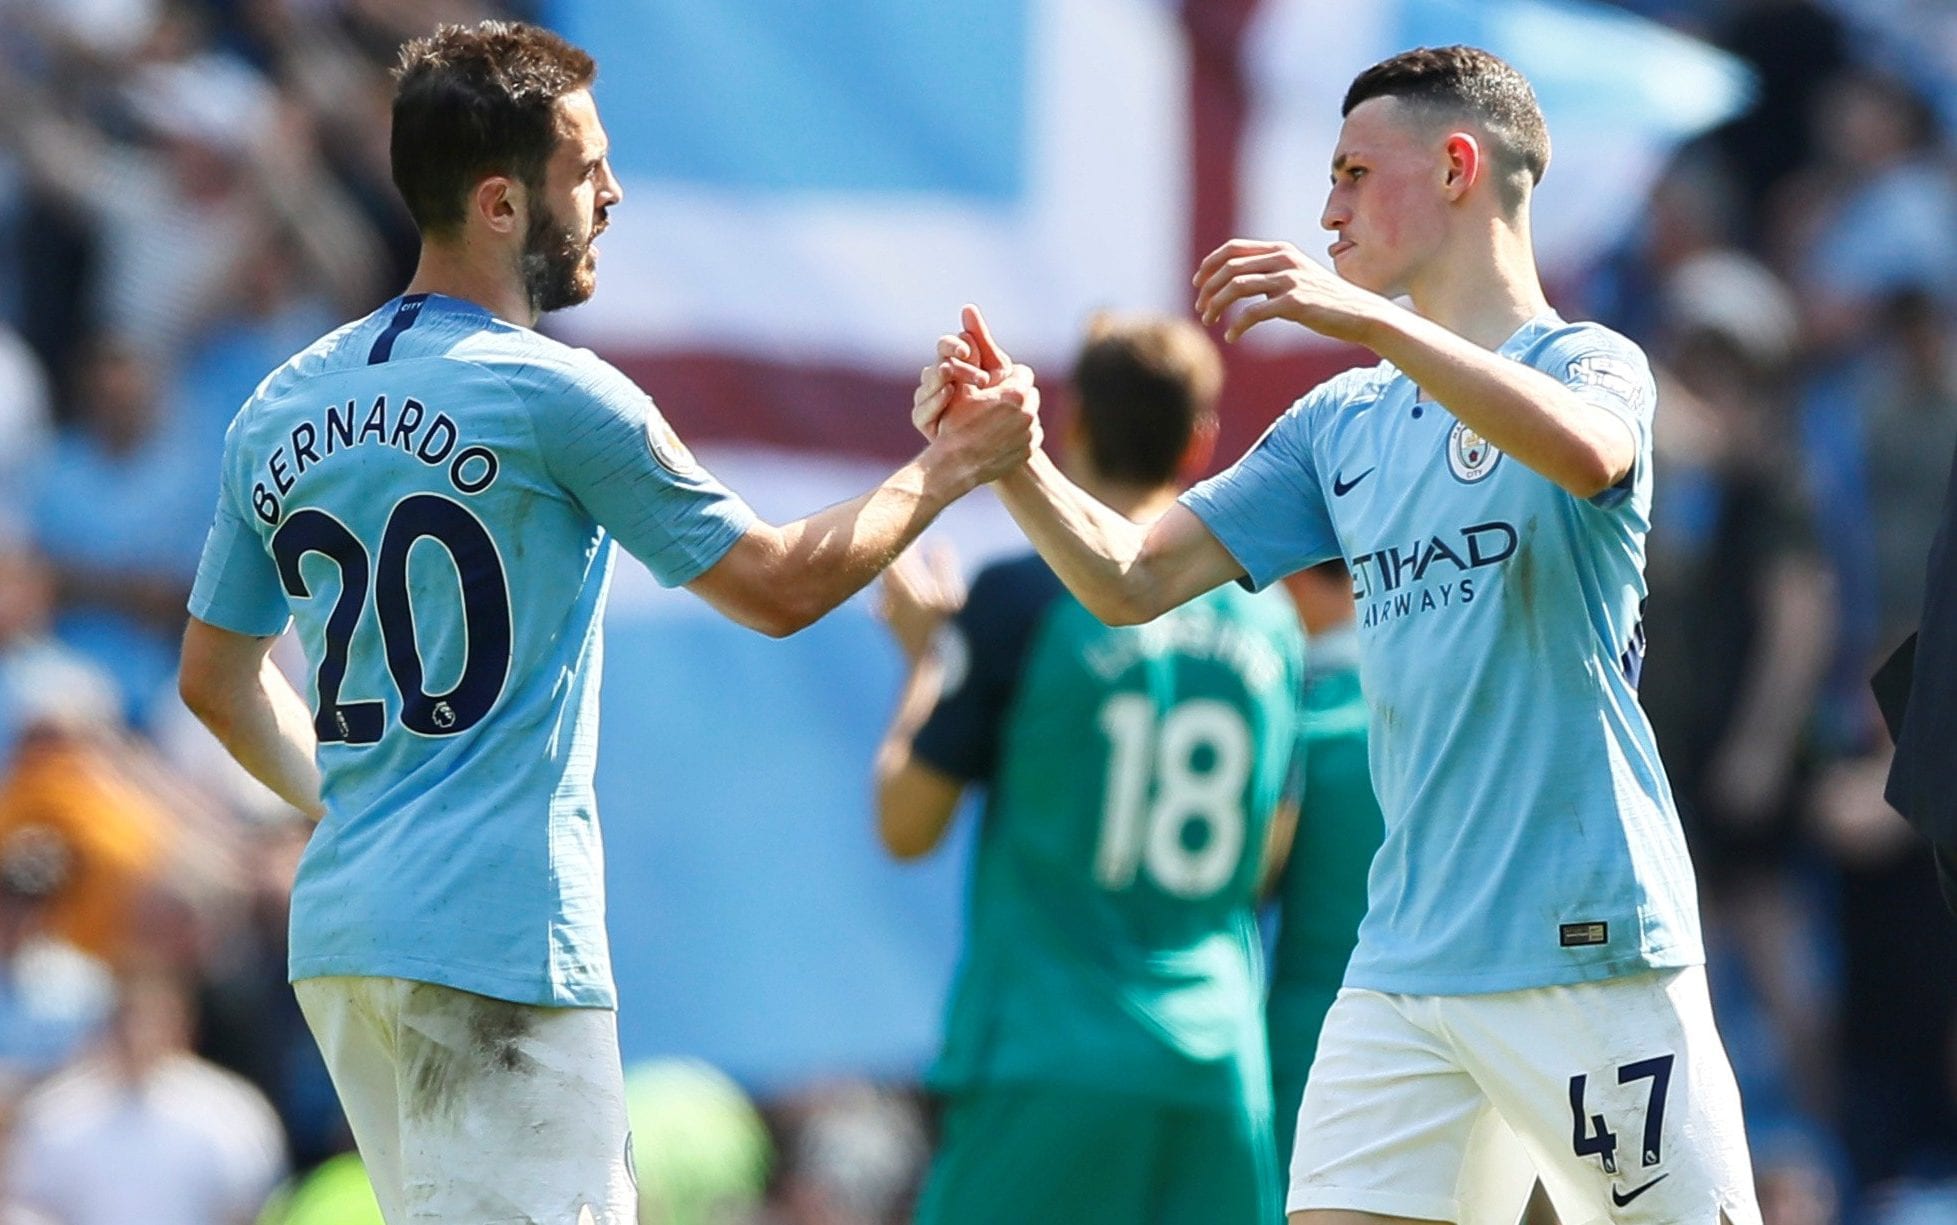 Pep Guardiola hails 'special' Phil Foden: 'I see many players as a manager... this guy has something that is hard to find'